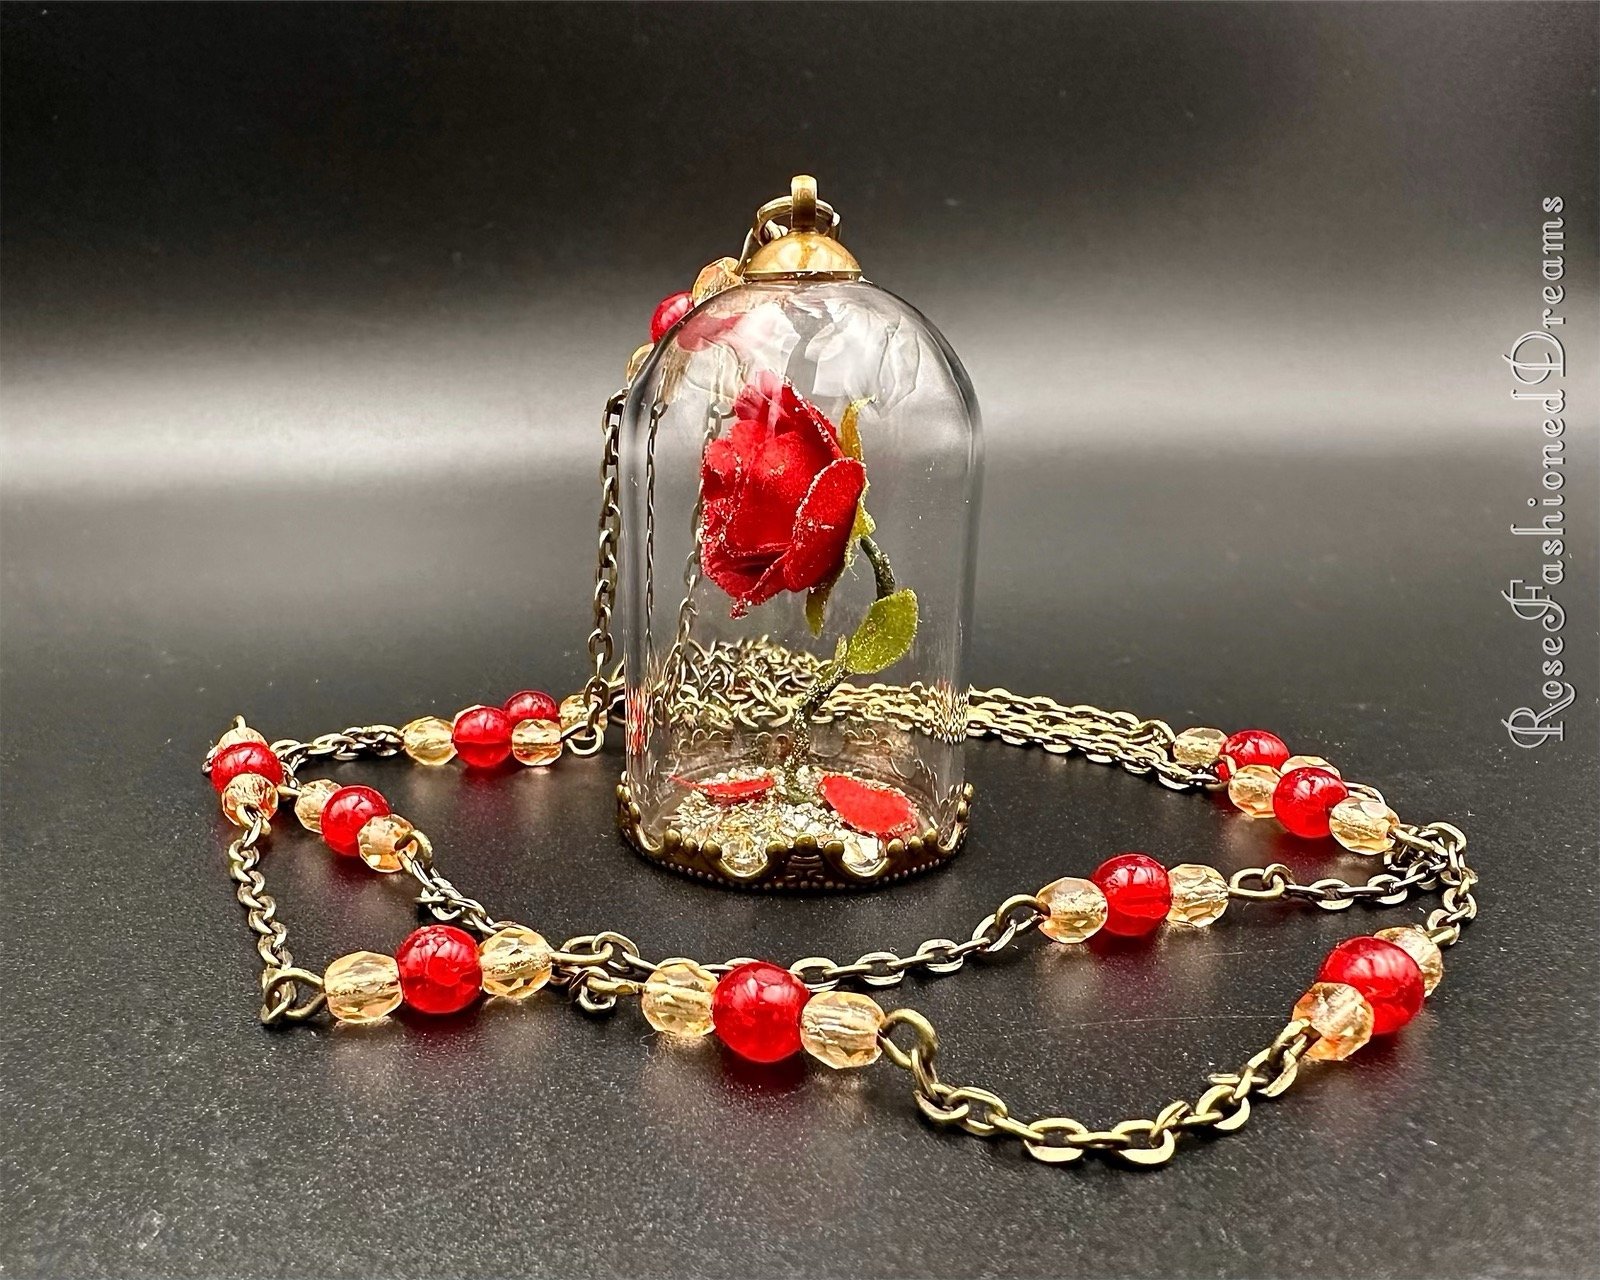 https://assets.bigcartel.com/product_images/3d60cbcd-f6dd-4c2b-8595-9511720a035e/enchanted-rose-glass-dome-necklace.jpg?auto=format&fit=max&w=2000